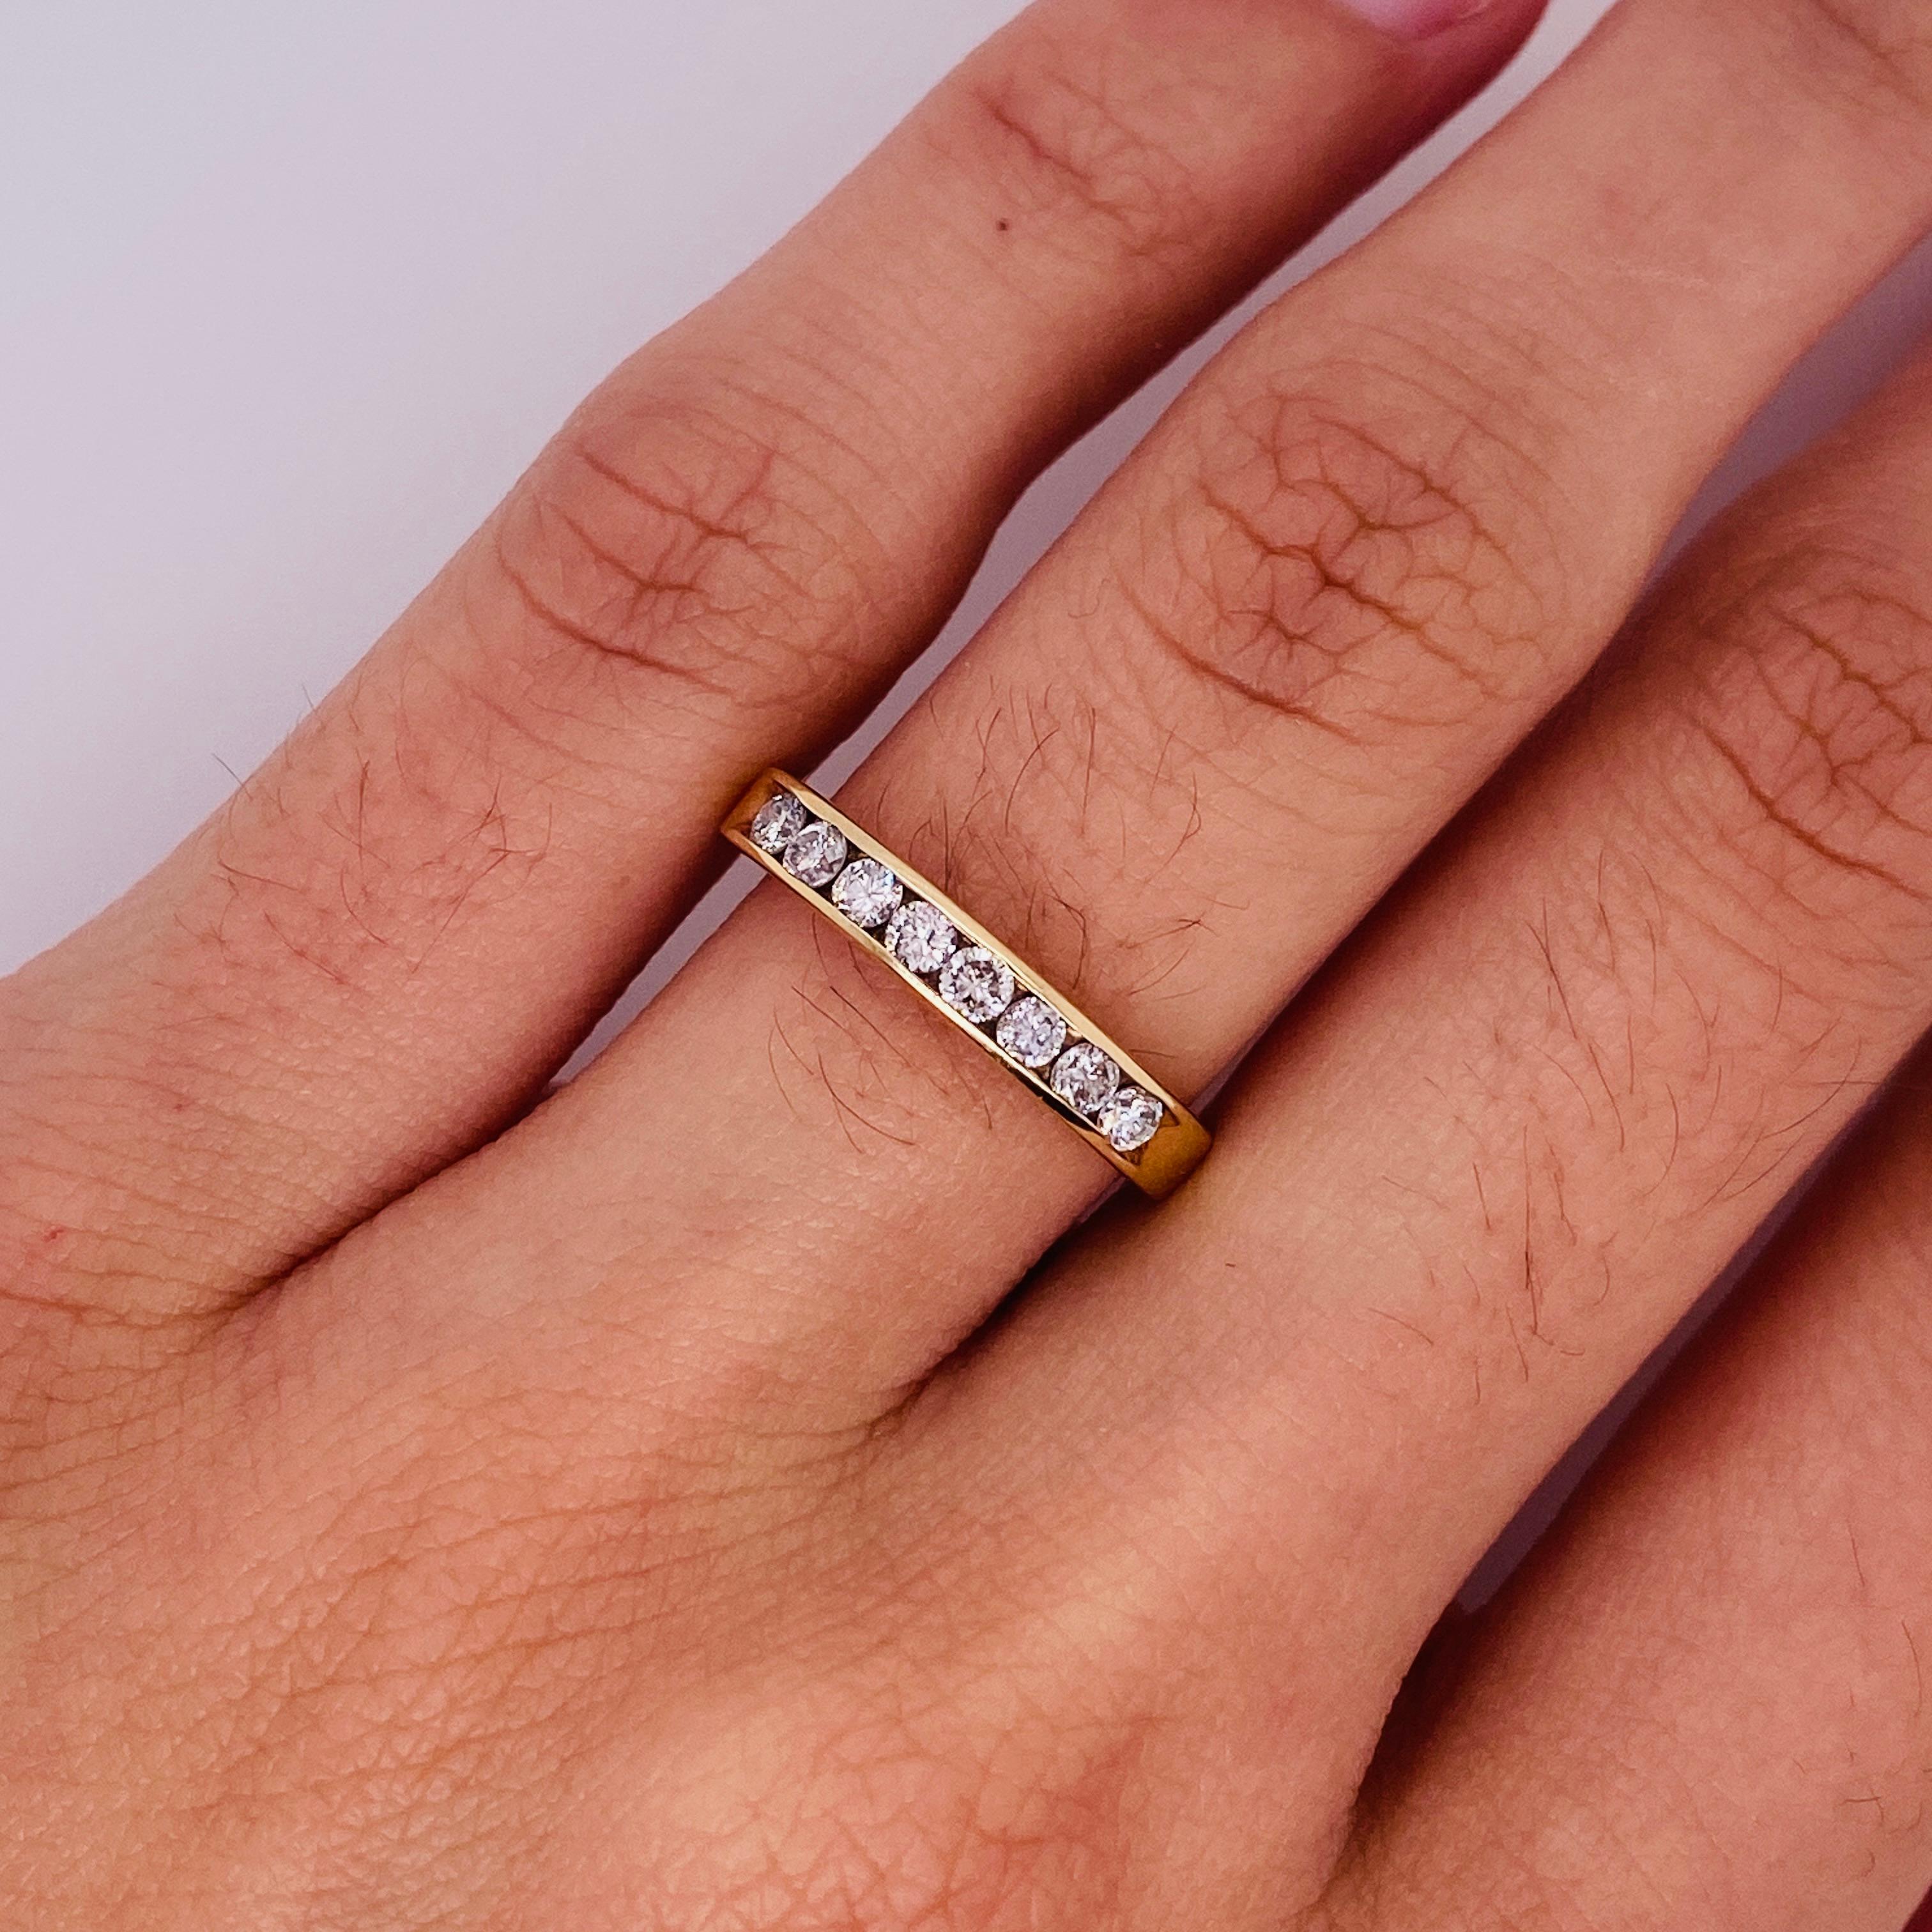 Sitting across the top of your finger, the channel of yellow gold creates a beautiful frame for the eight diamonds that seem to float next to each other. The sides of the ring are flat and smooth for easy stacking, and the band tapers down to a slim